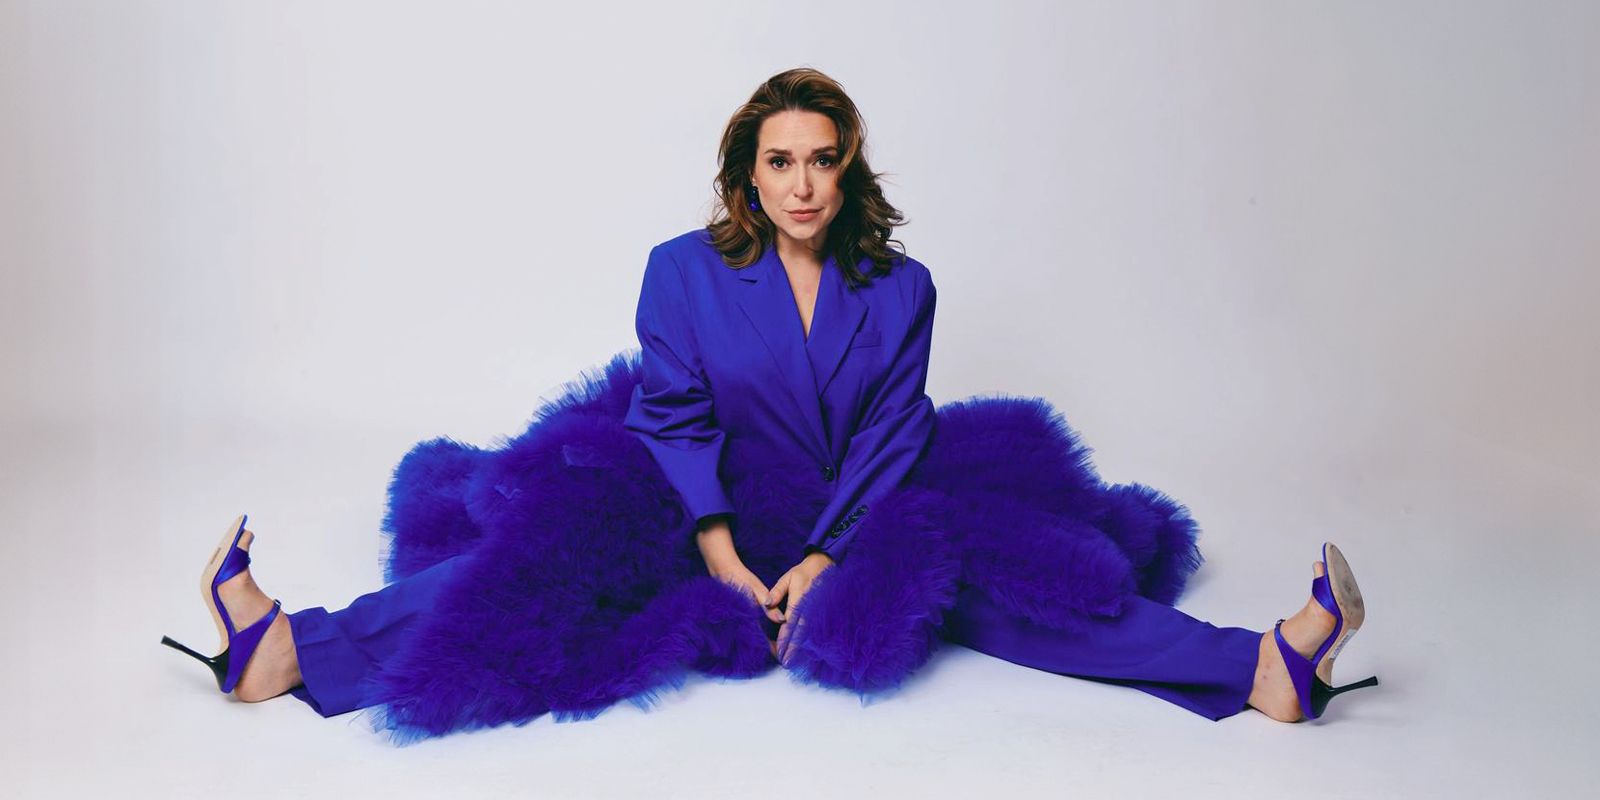 A woman in a periwinkle suit sits on a white floor wrapped in a purple boa.